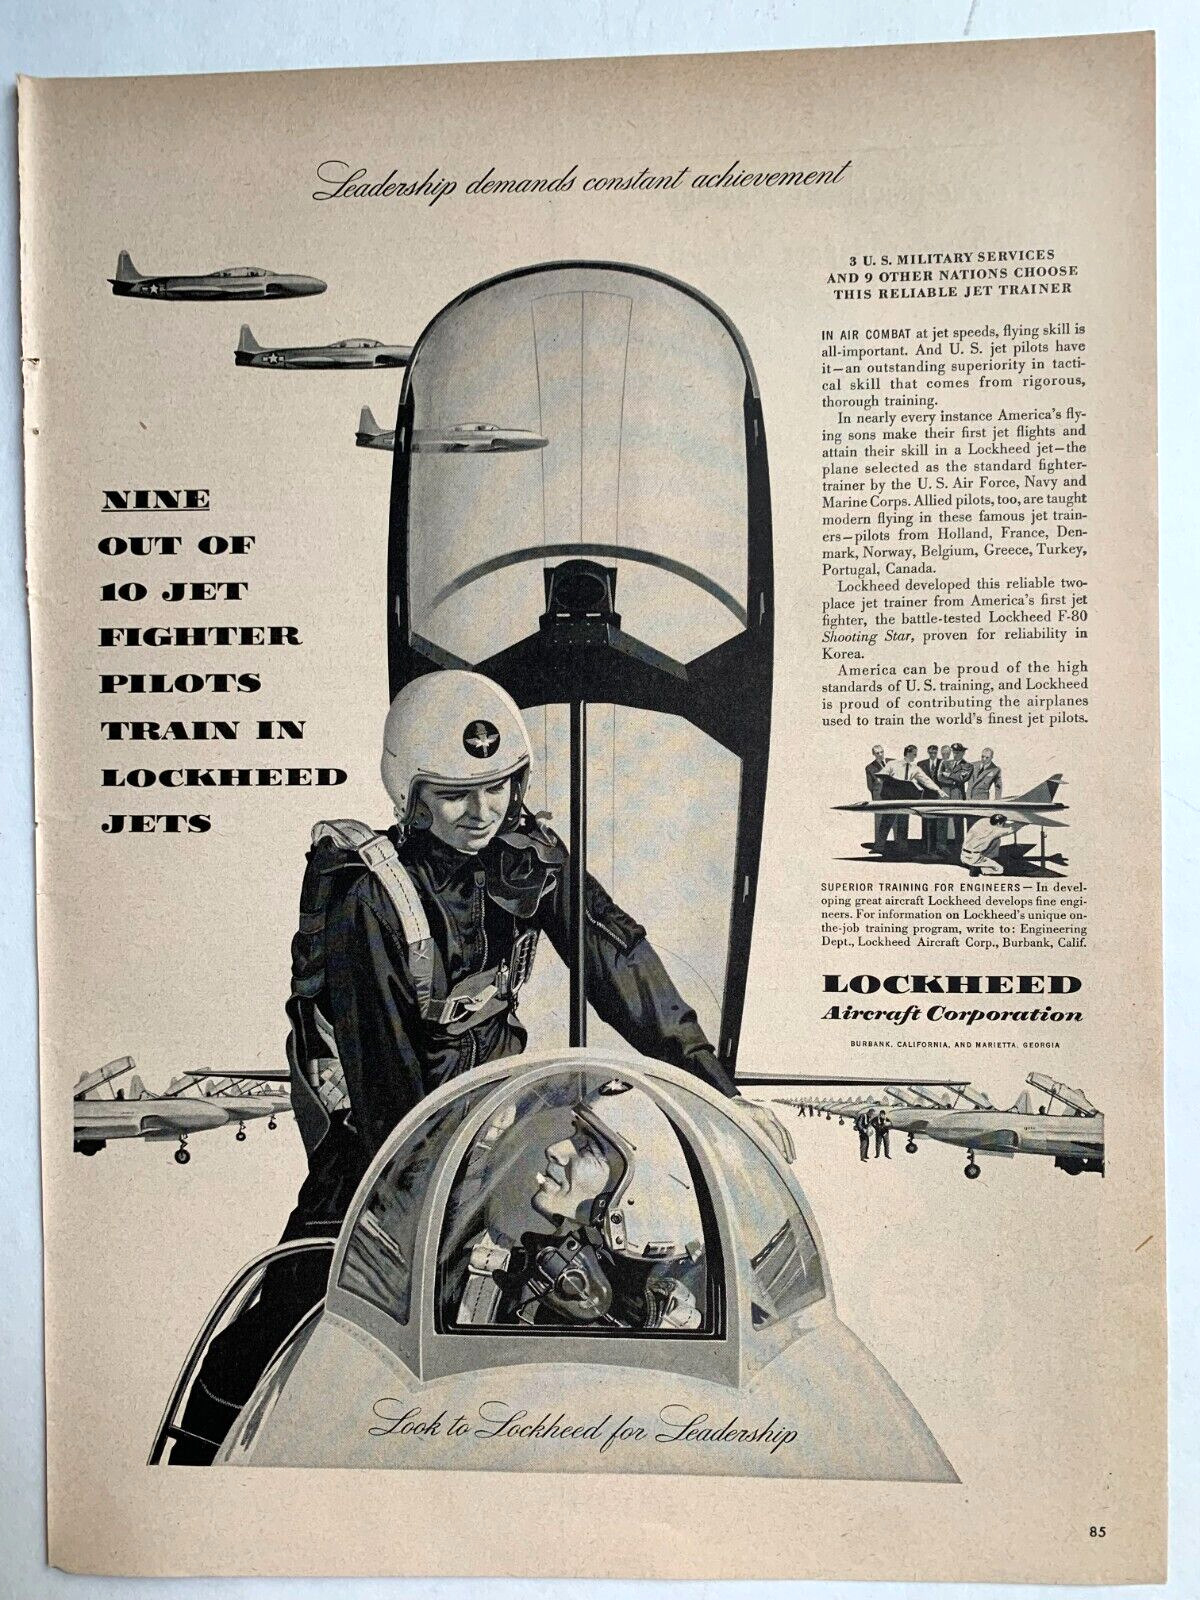 1952 Lockheed Print Ad 13in x10in Fighter Pilot Jet Trainer F-80 Shooting Star